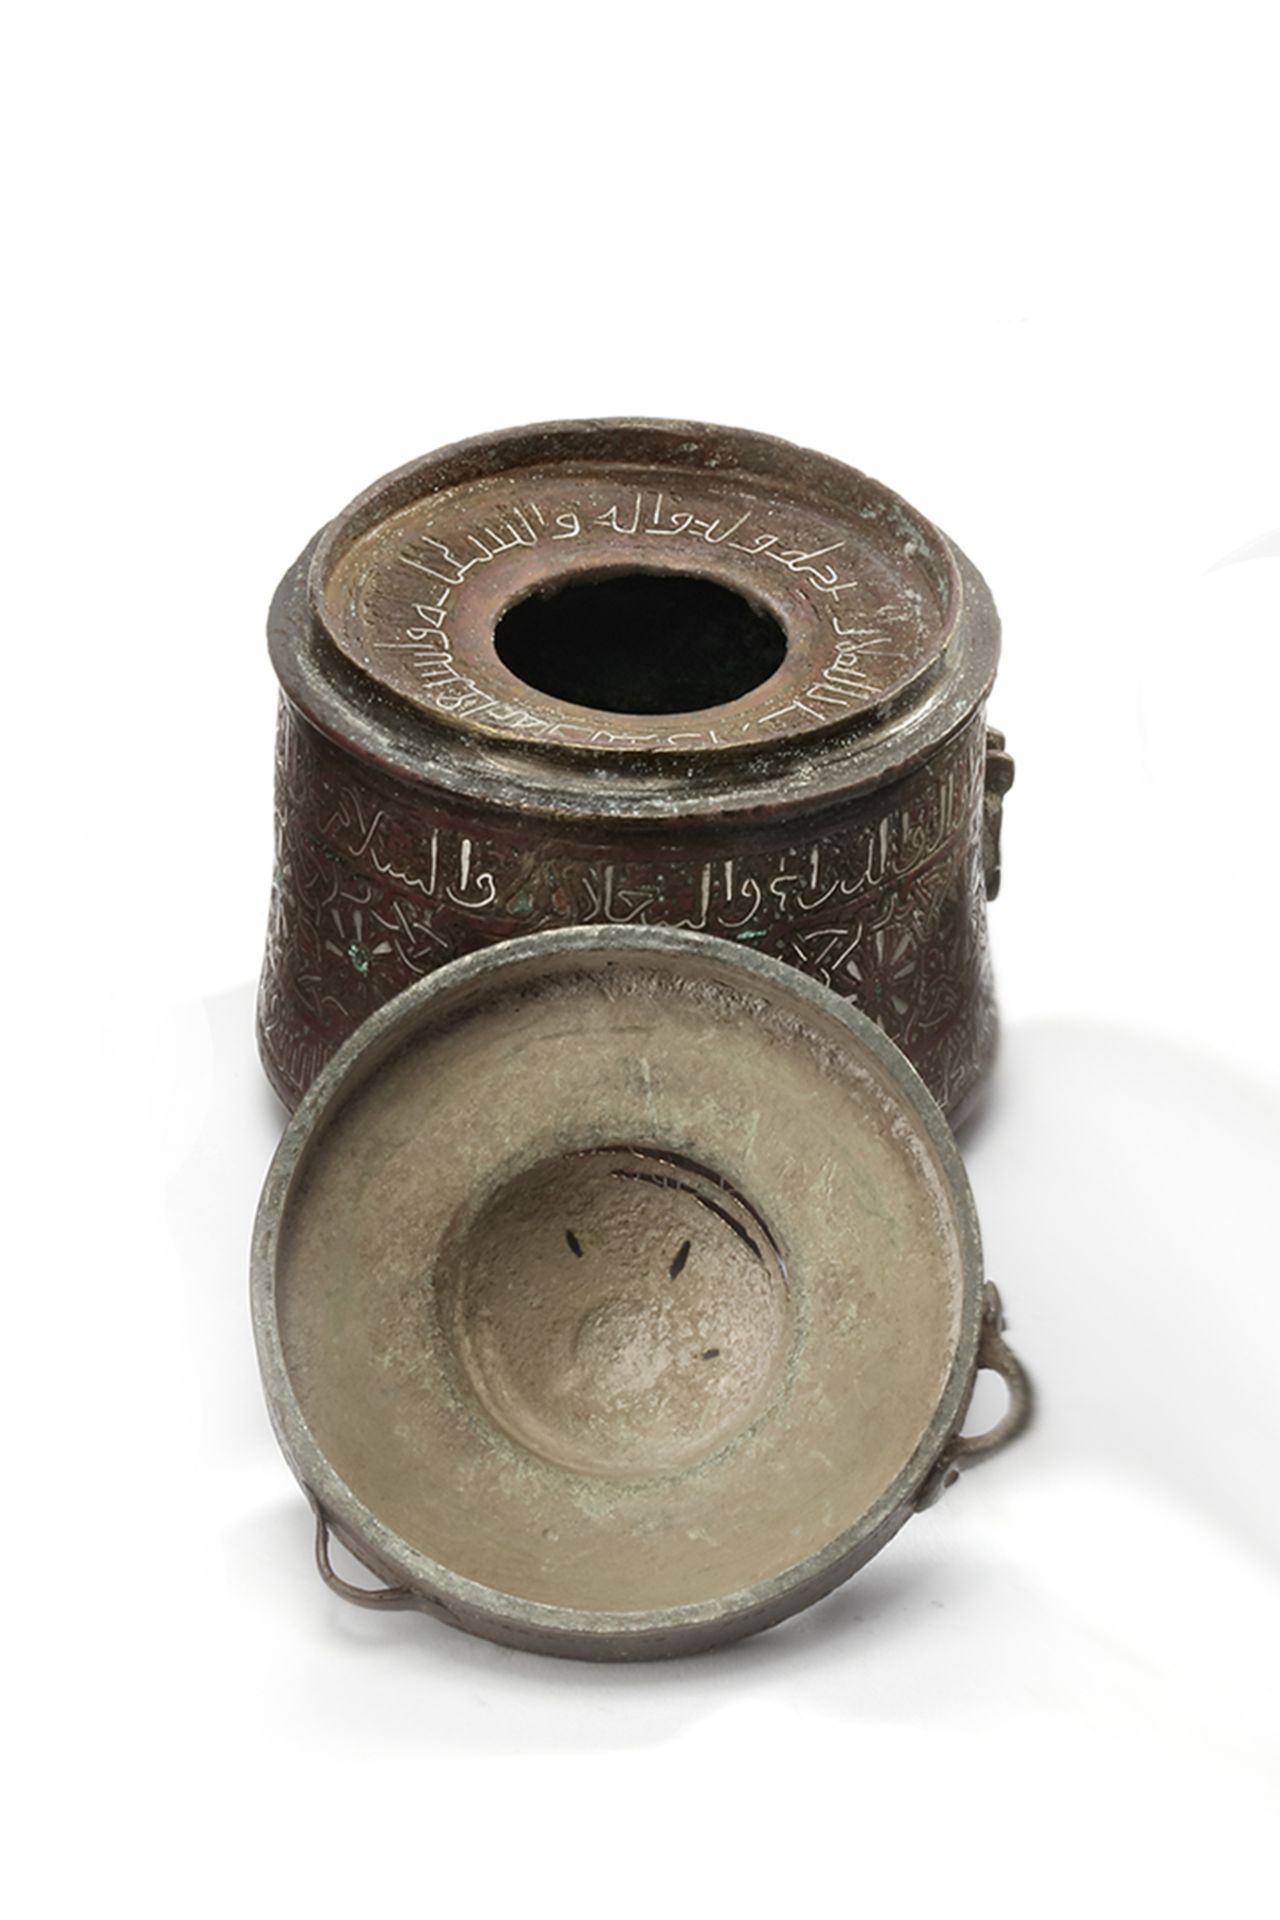 A KHURASAN SILVER- INLAID BRONZE INKWELL, 12TH-13TH CENTURY - Image 4 of 4